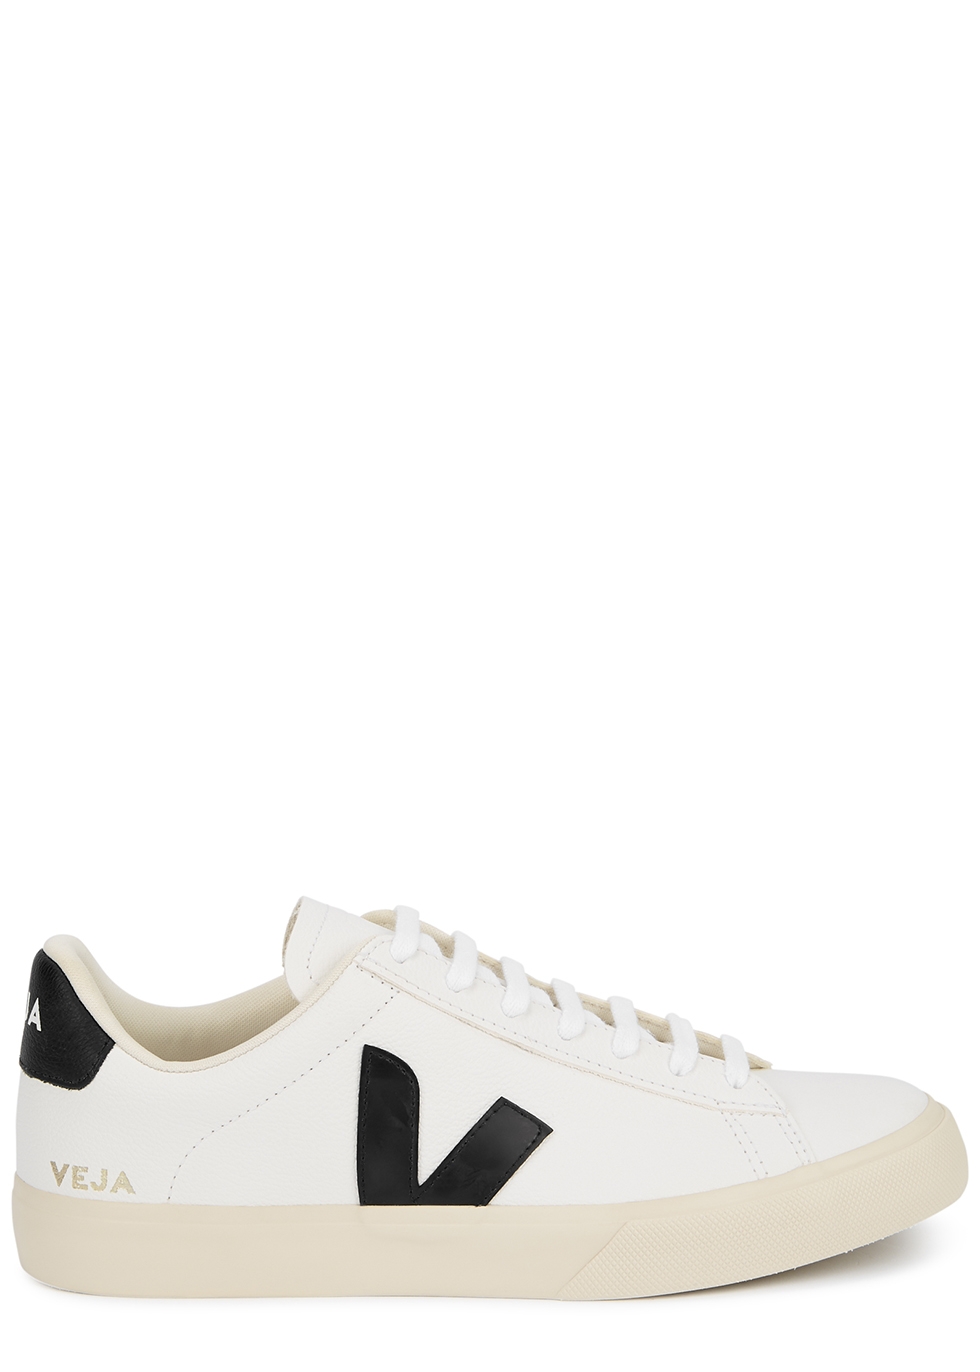 Veja Campo White Leather Sneakers - White And Black